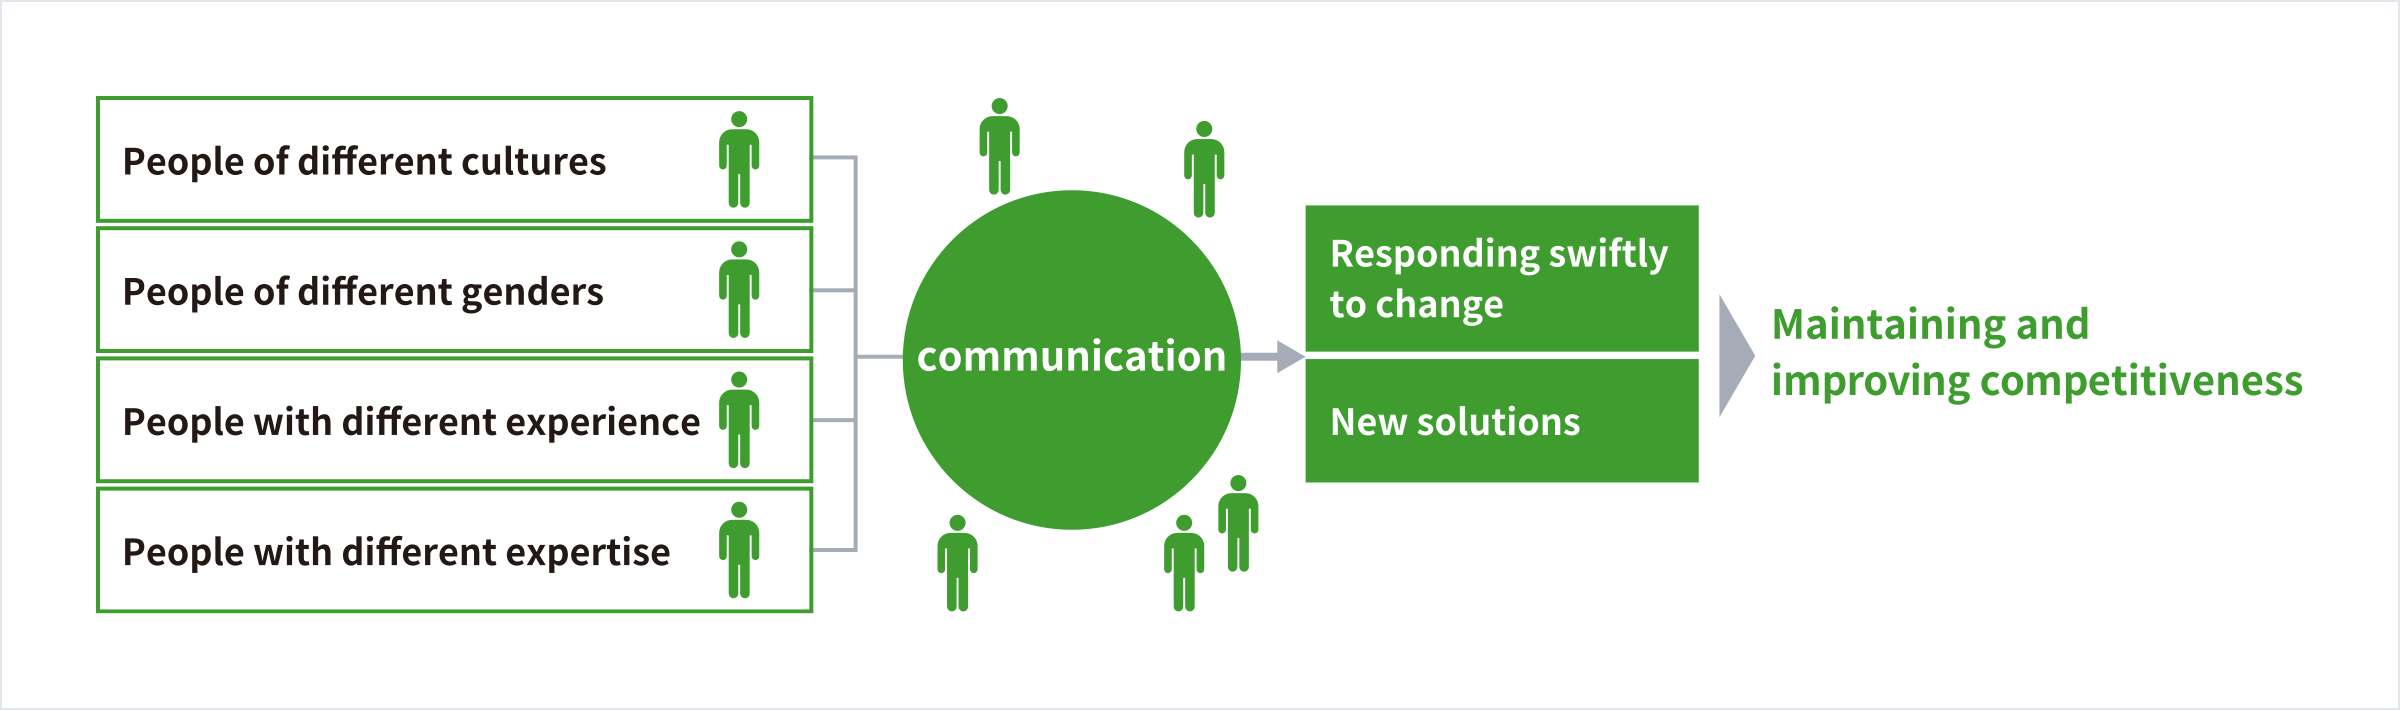 Communication among people with various backgrounds, including those varying in culture, gender, experience and expertise, are indispensable for swiftly responding to changes and finding new solutions, and help maintain and boost competitiveness.